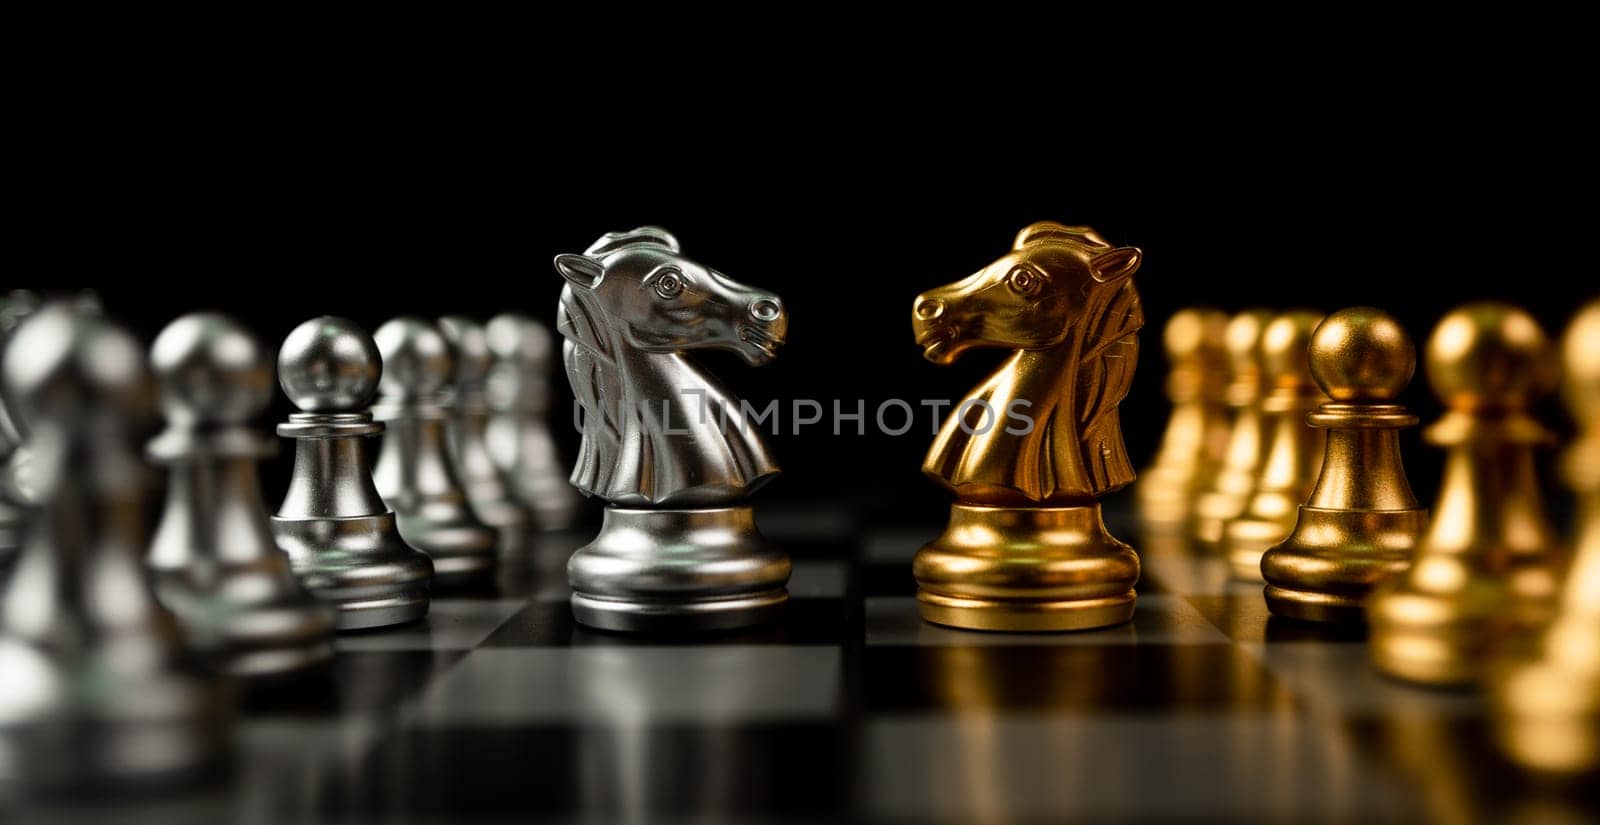 Golden and silver horse chess pieces Invite face to face and There are chess pieces in the background. Concept of competing, leadership and business vision for a win in business games by PattyPhoto